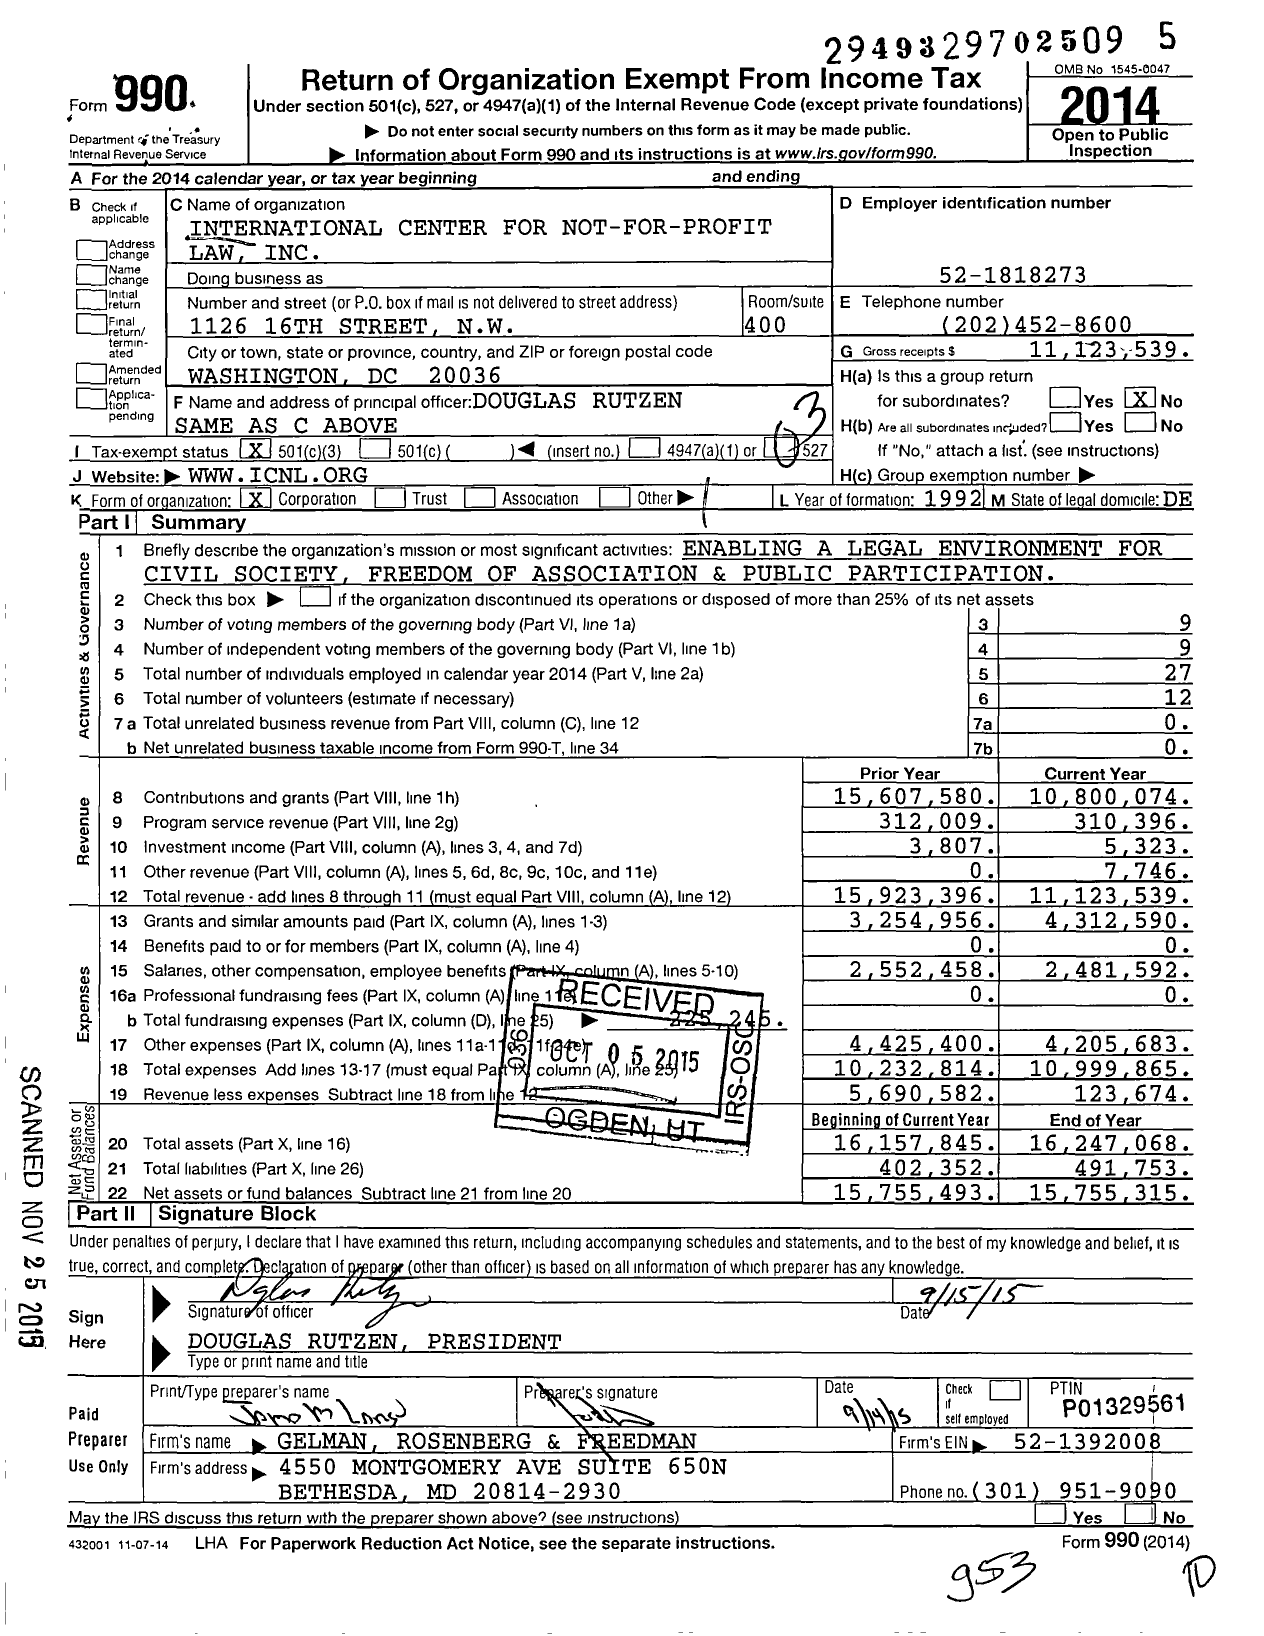 Image of first page of 2014 Form 990 for International Center for Not-For-Profit Law